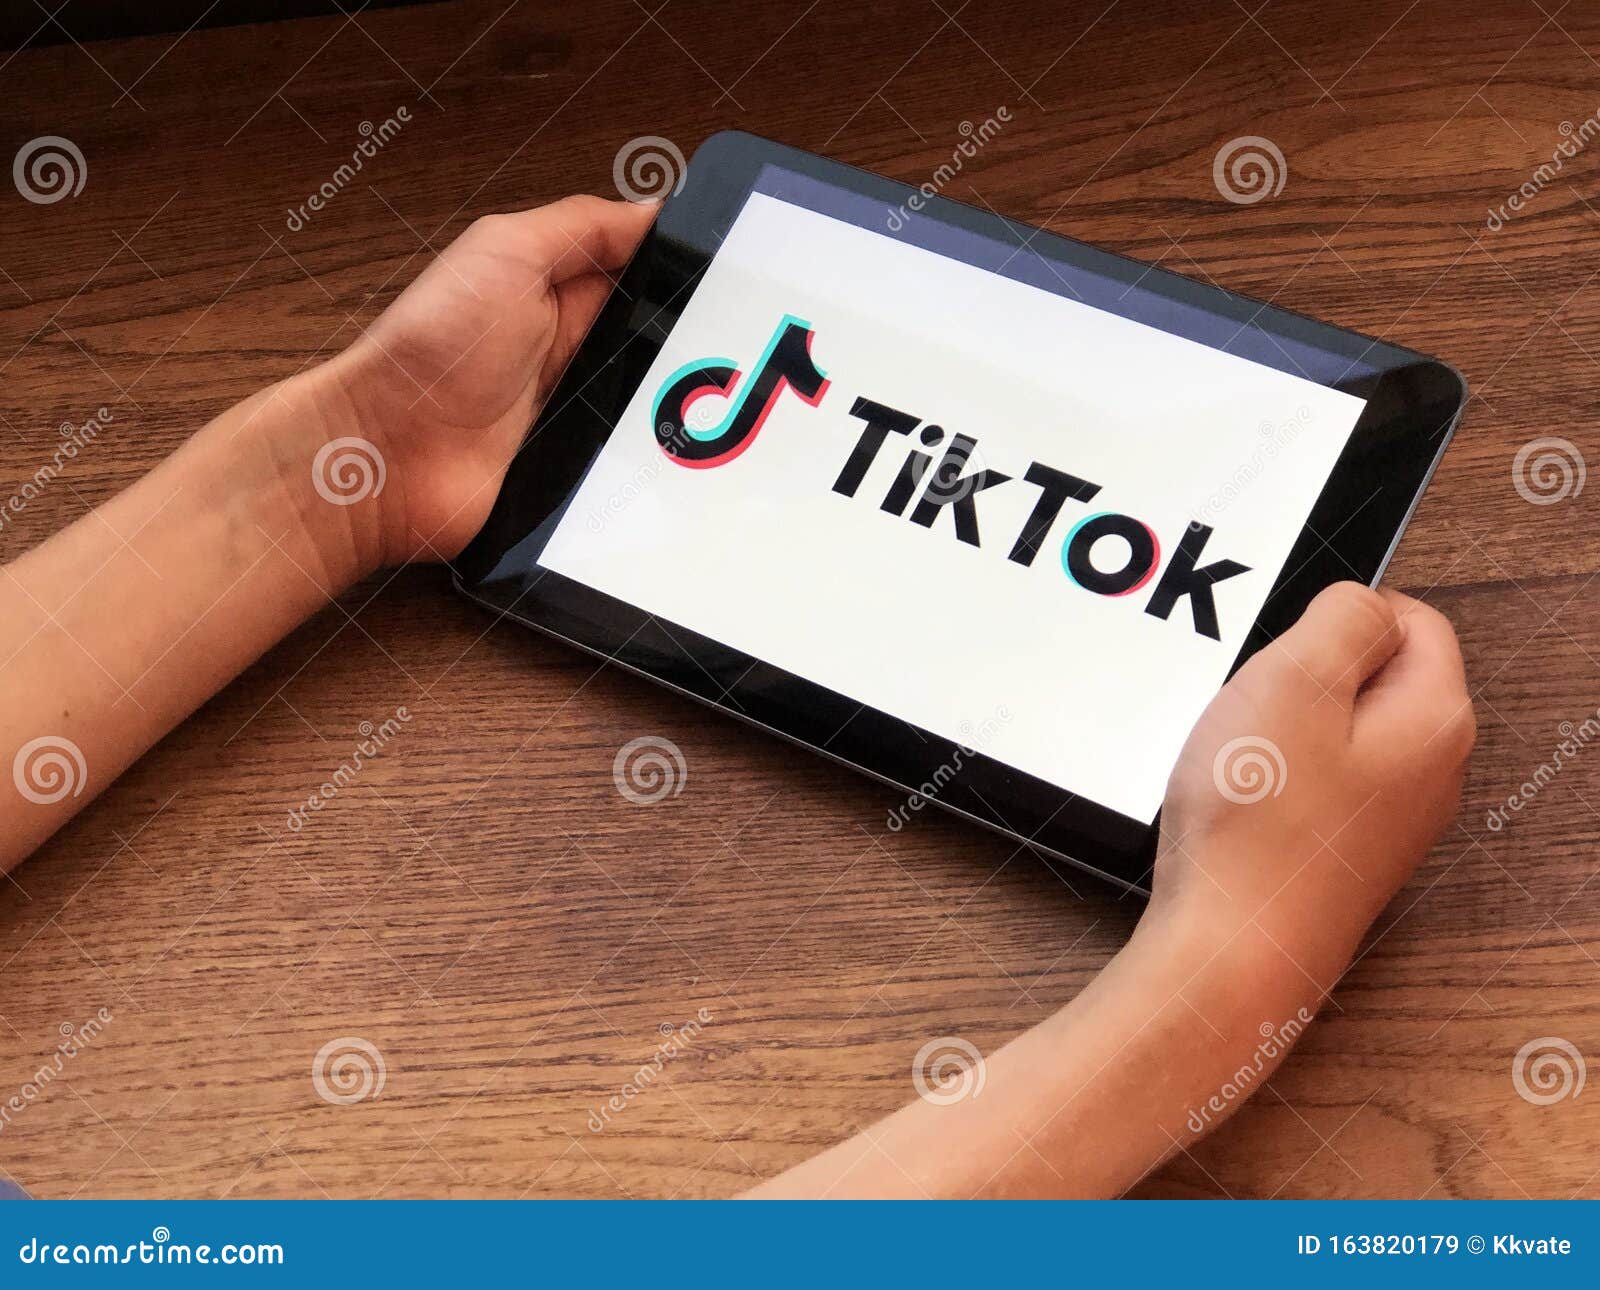 September 2019 Parma Italy Tablet In Kids Hands With Tik Tok Downloaded On Screen Tik Tok App Editorial Stock Image Image Of Tablet Network 163820179